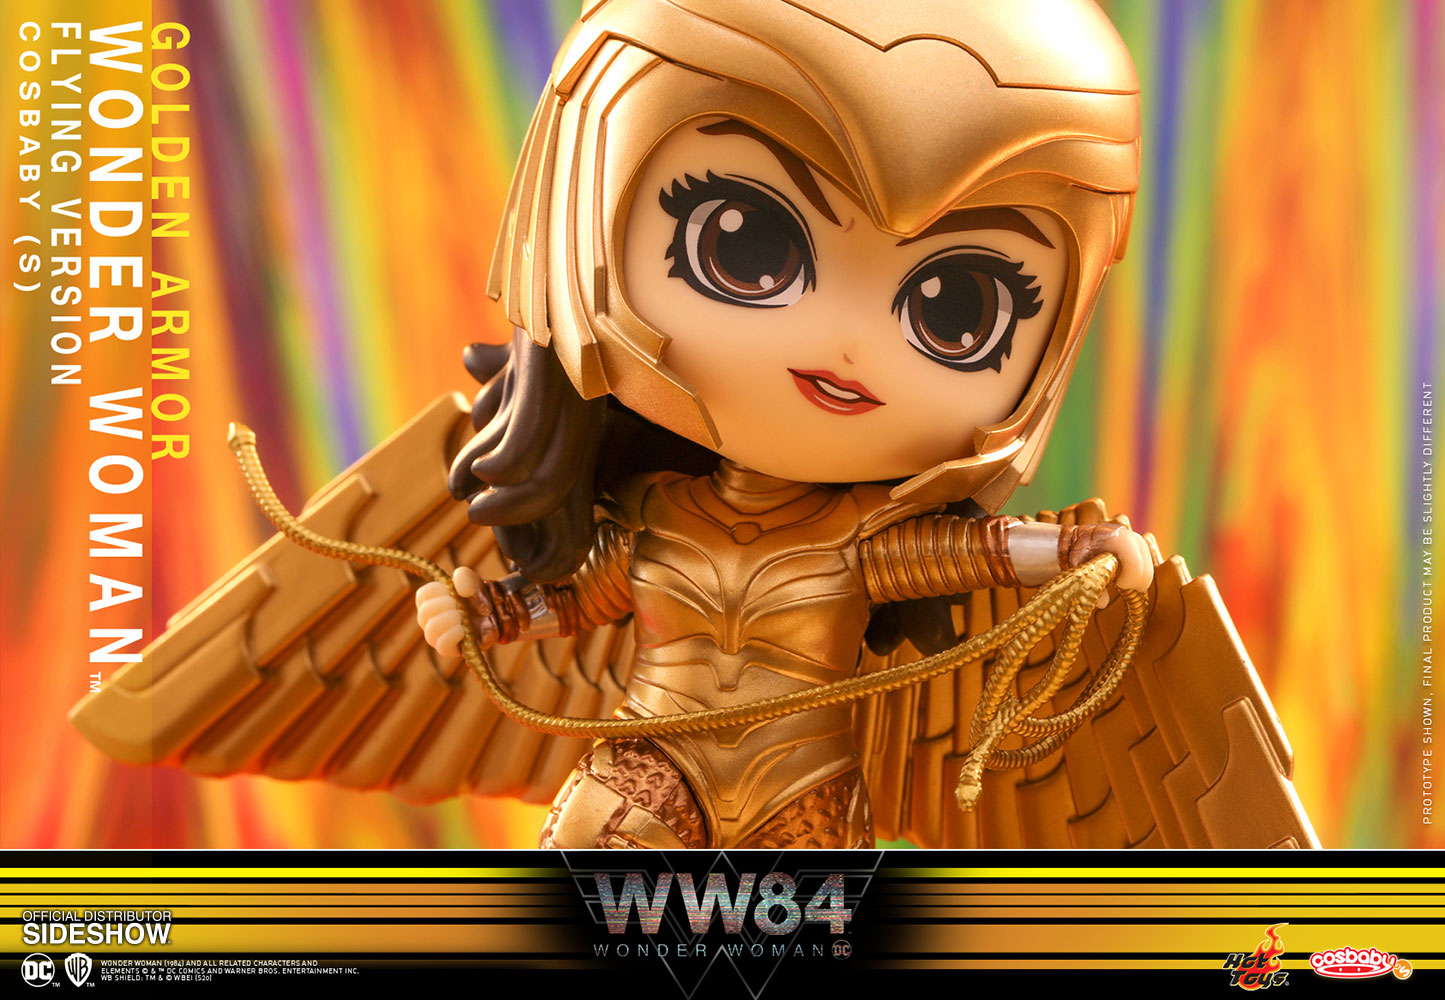 Hot Toys Wonder Woman 1984 Golden Armor Wonder Woman Flying Version S Cosbaby Collectible Figure for sale online 